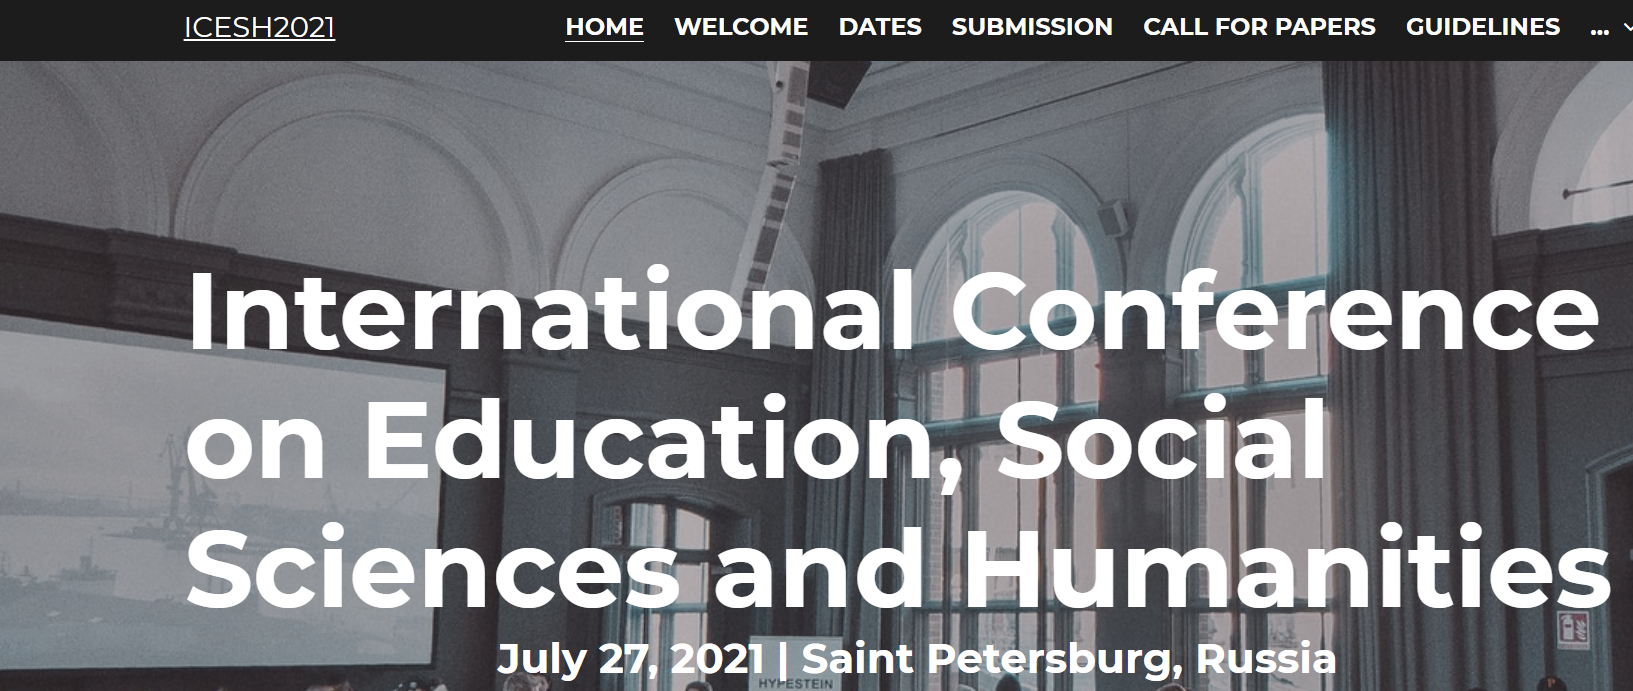 International Conference on Education, Social Sciences and Humanities, Saint Petersburg, Russia,Saint Petersburg,Russia